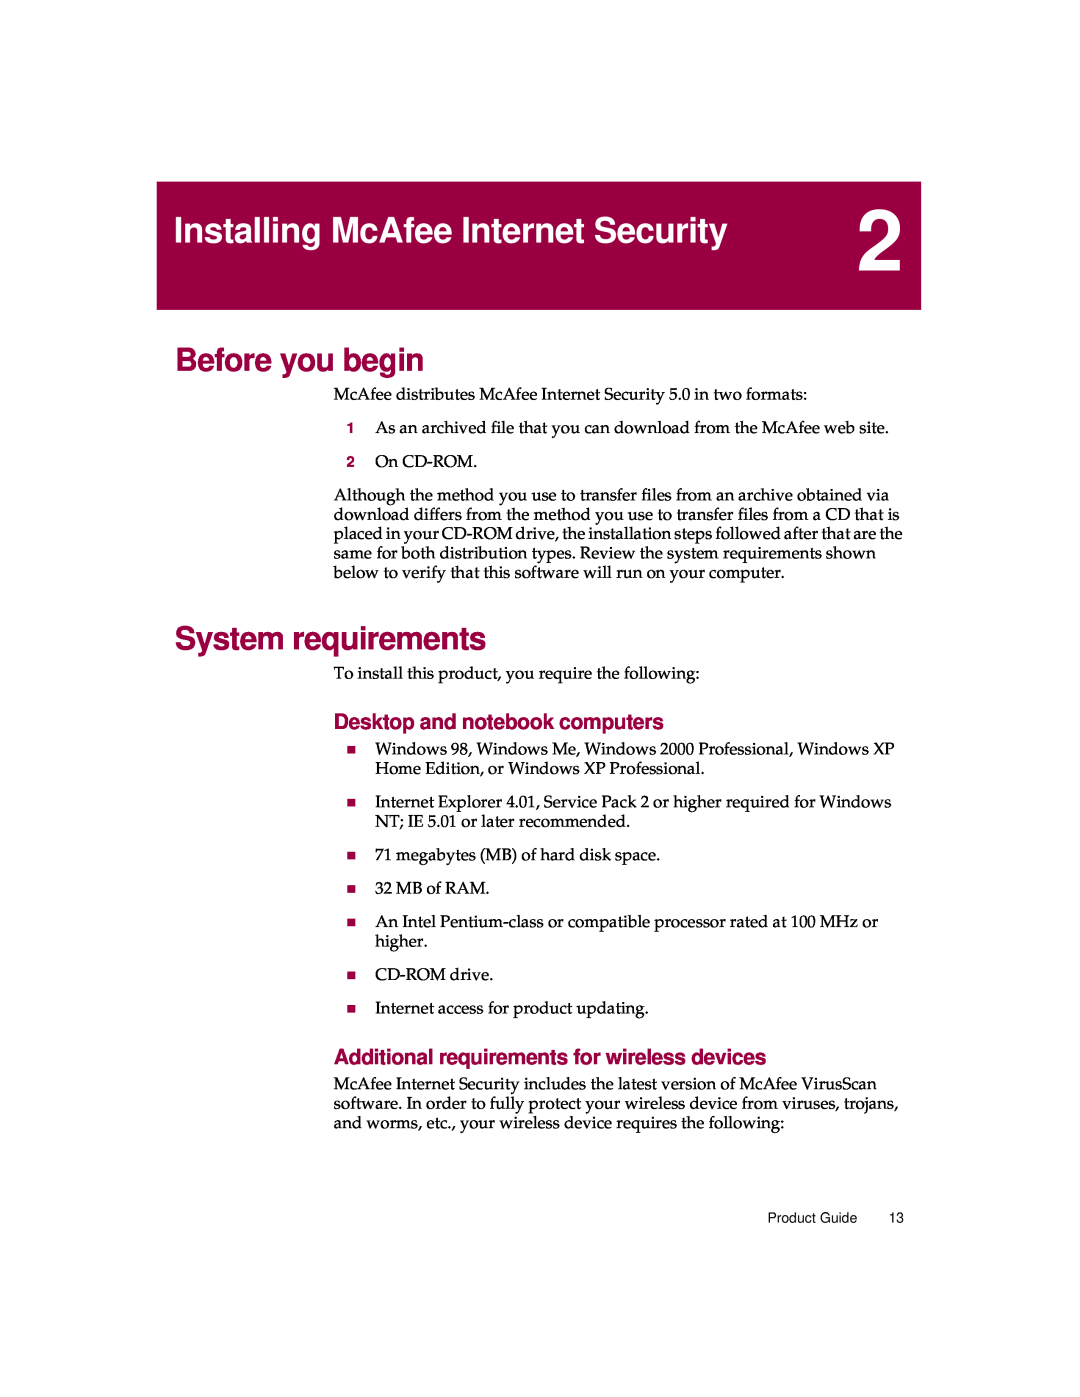 McAfee 5 manual Installing McAfee Internet Security, Before you begin, System requirements, Desktop and notebook computers 